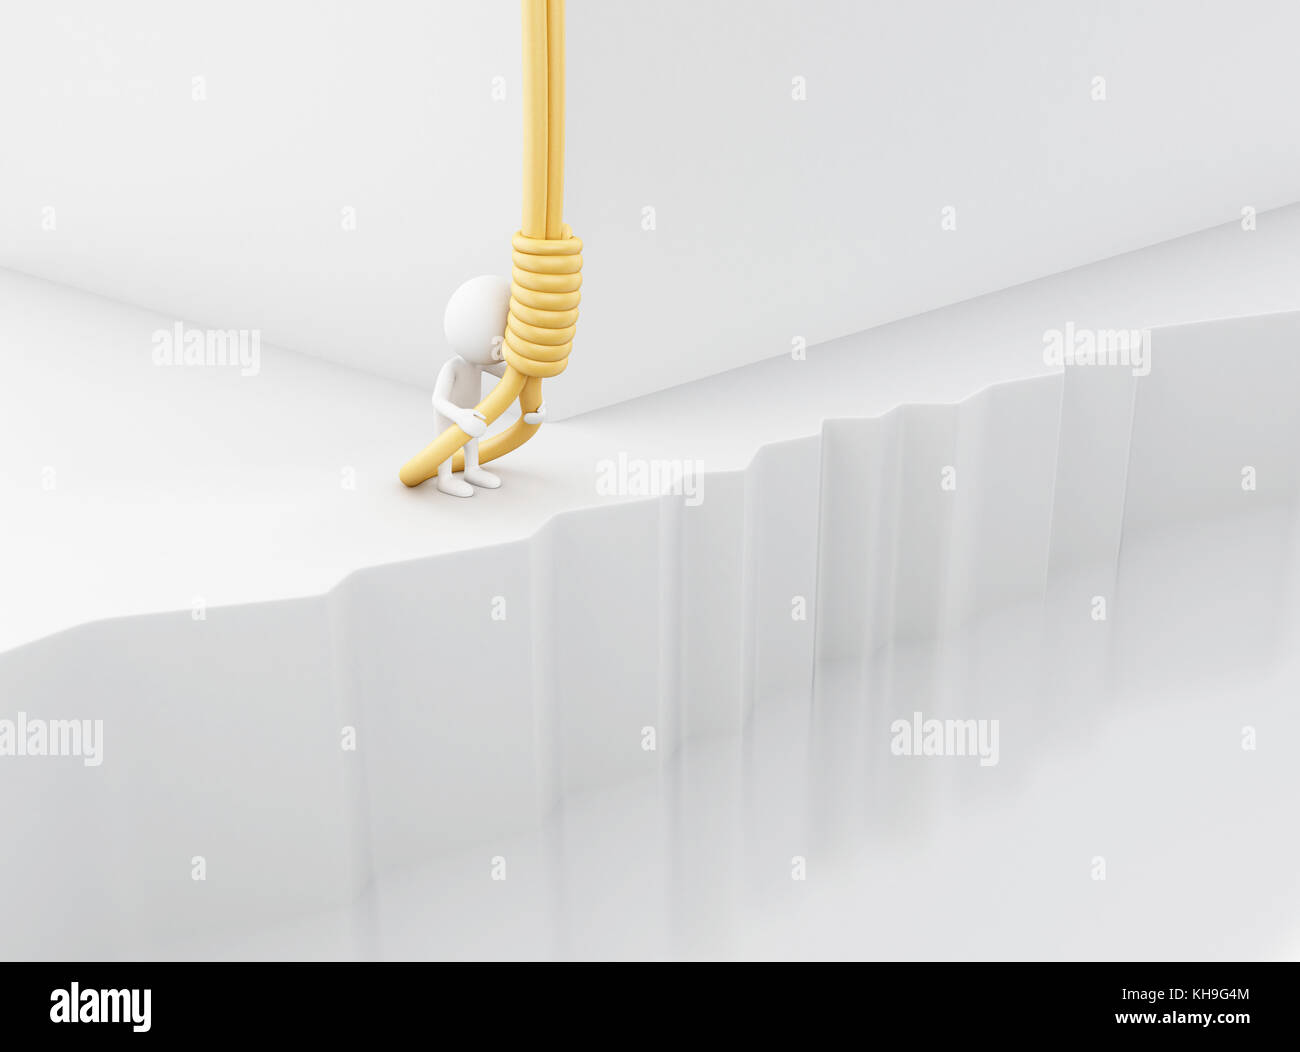 3d illustration. White people trying to hang himself. Suicide concept. Stock Photo